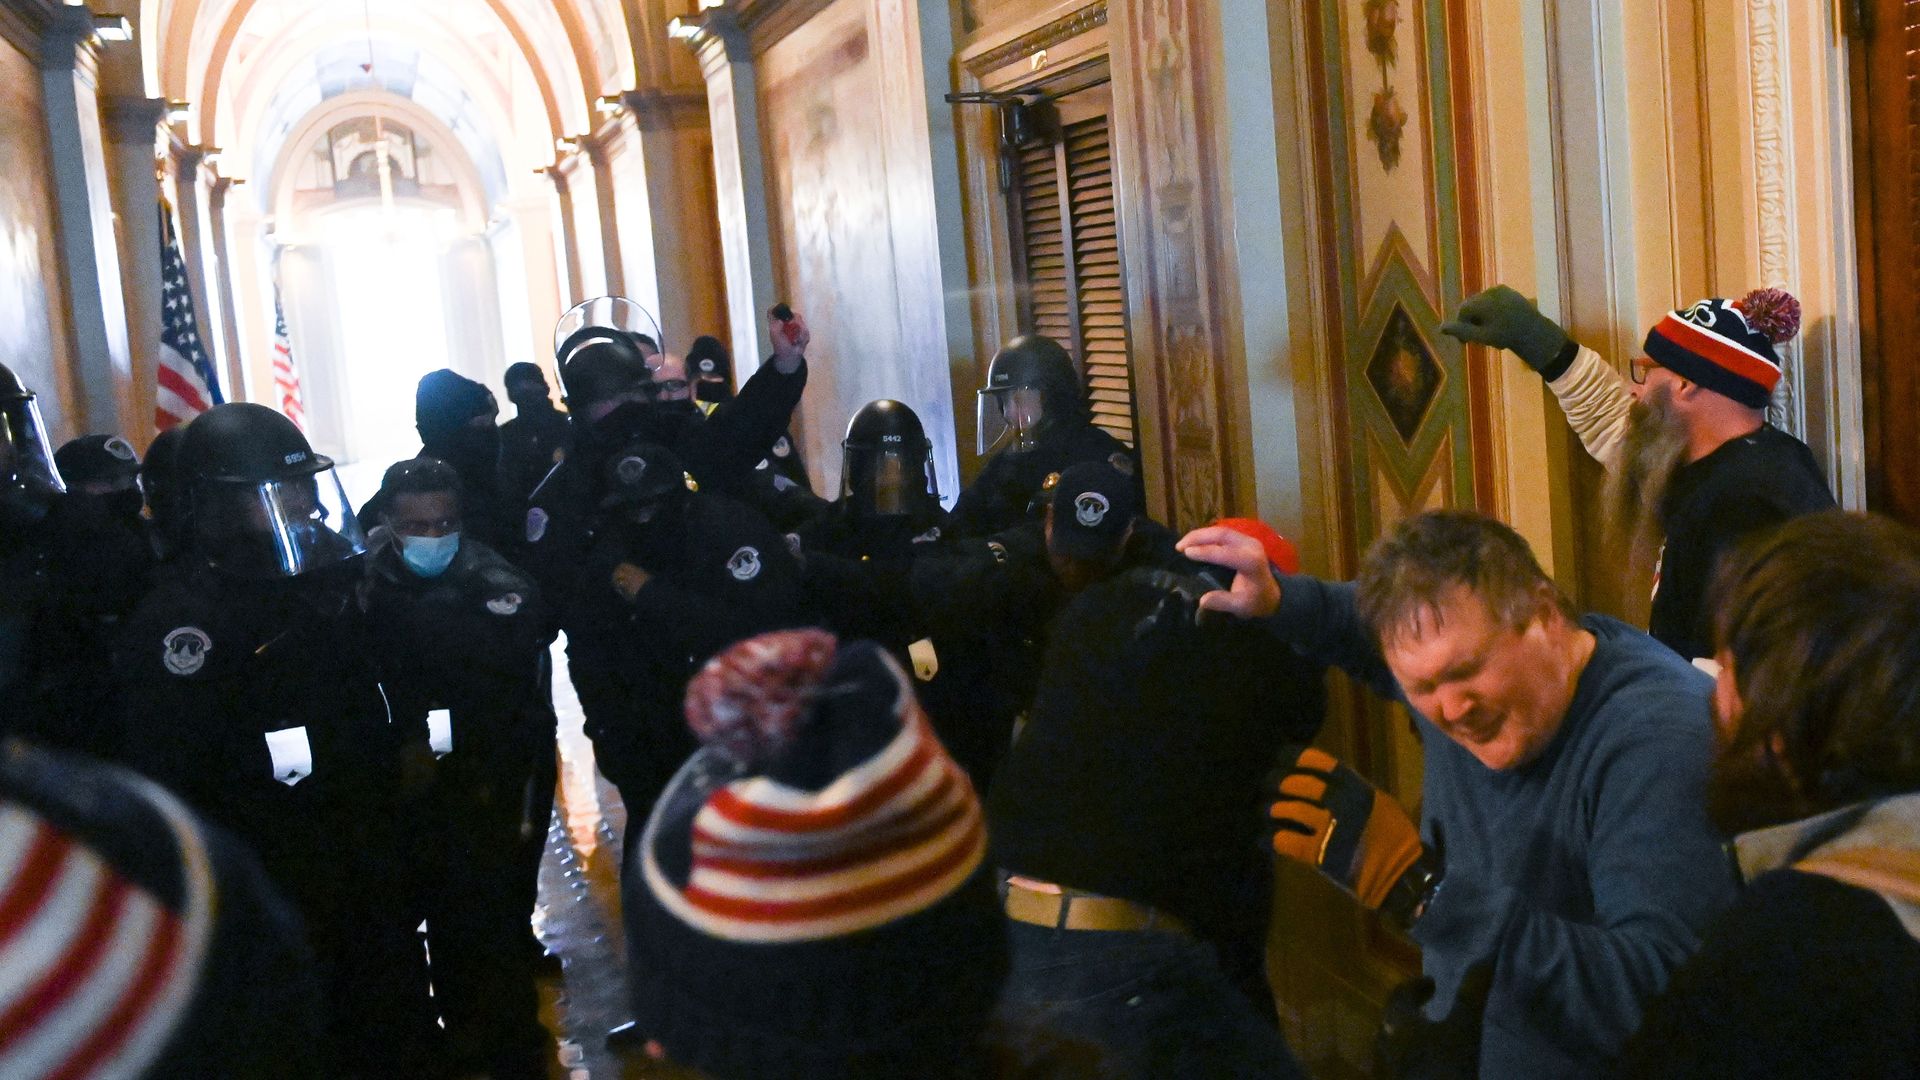 Police spray supporters of US President Donald Trump as they protest inside the US Capitol